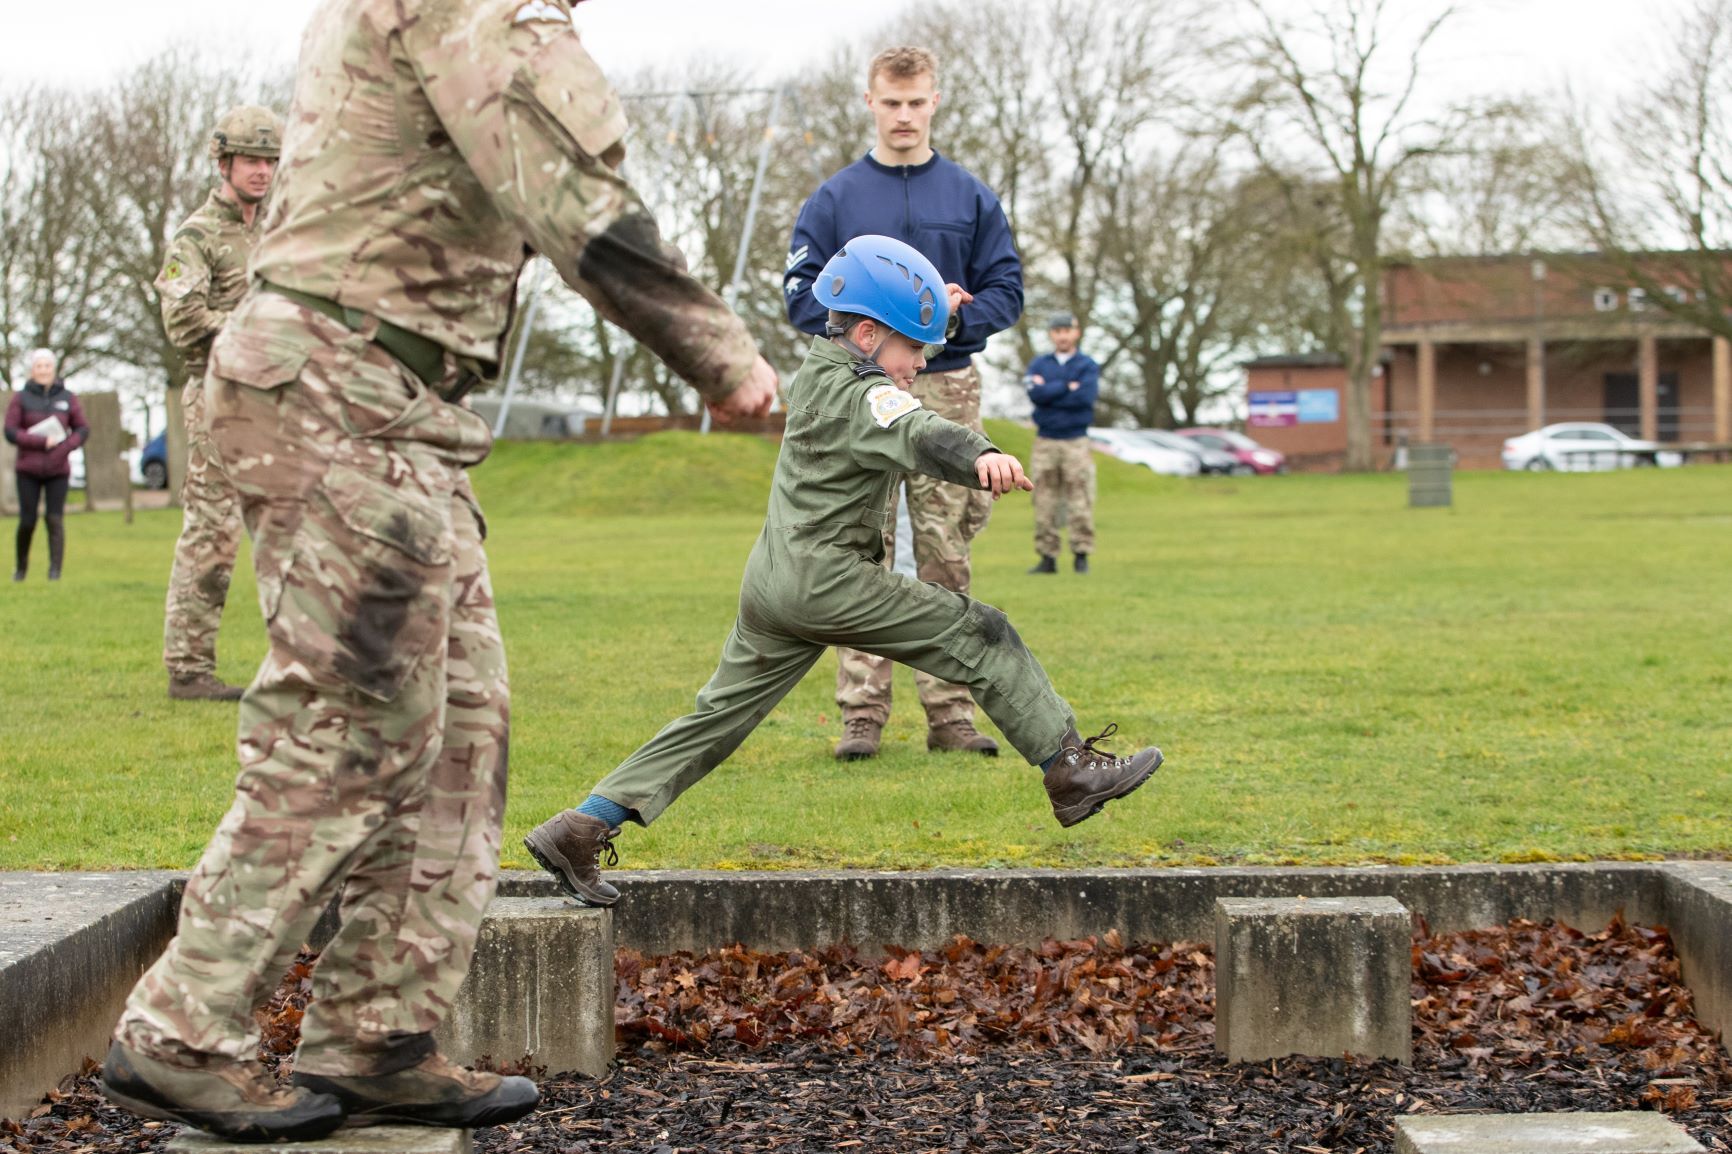 Jacob leaps across obstacle course with RAF personnel.